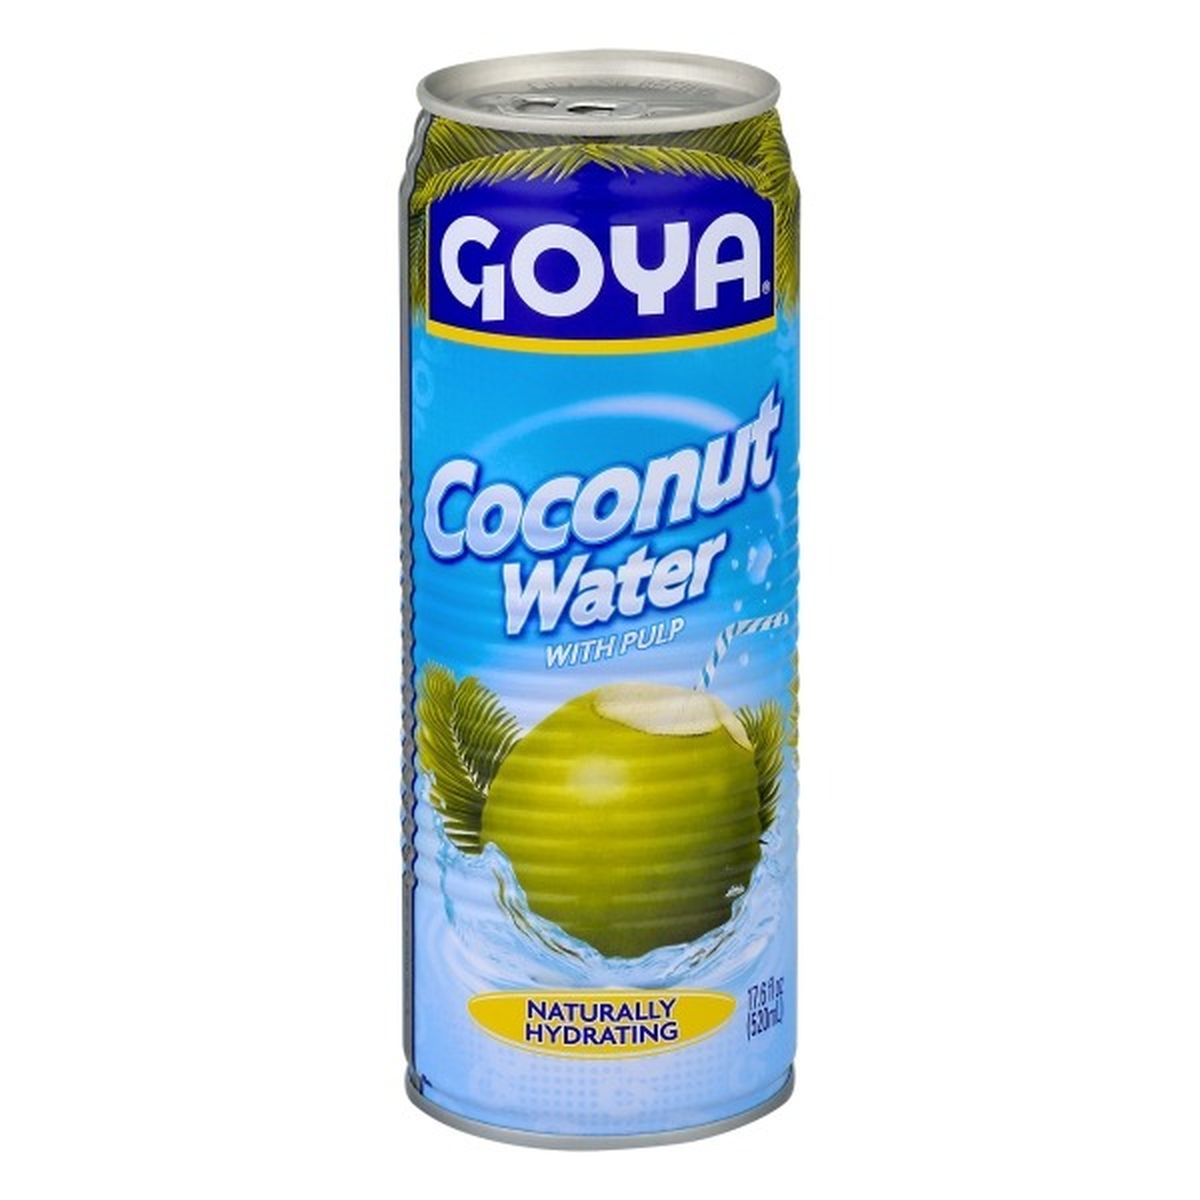 Calories in Goya Coconut Water, with Pulp